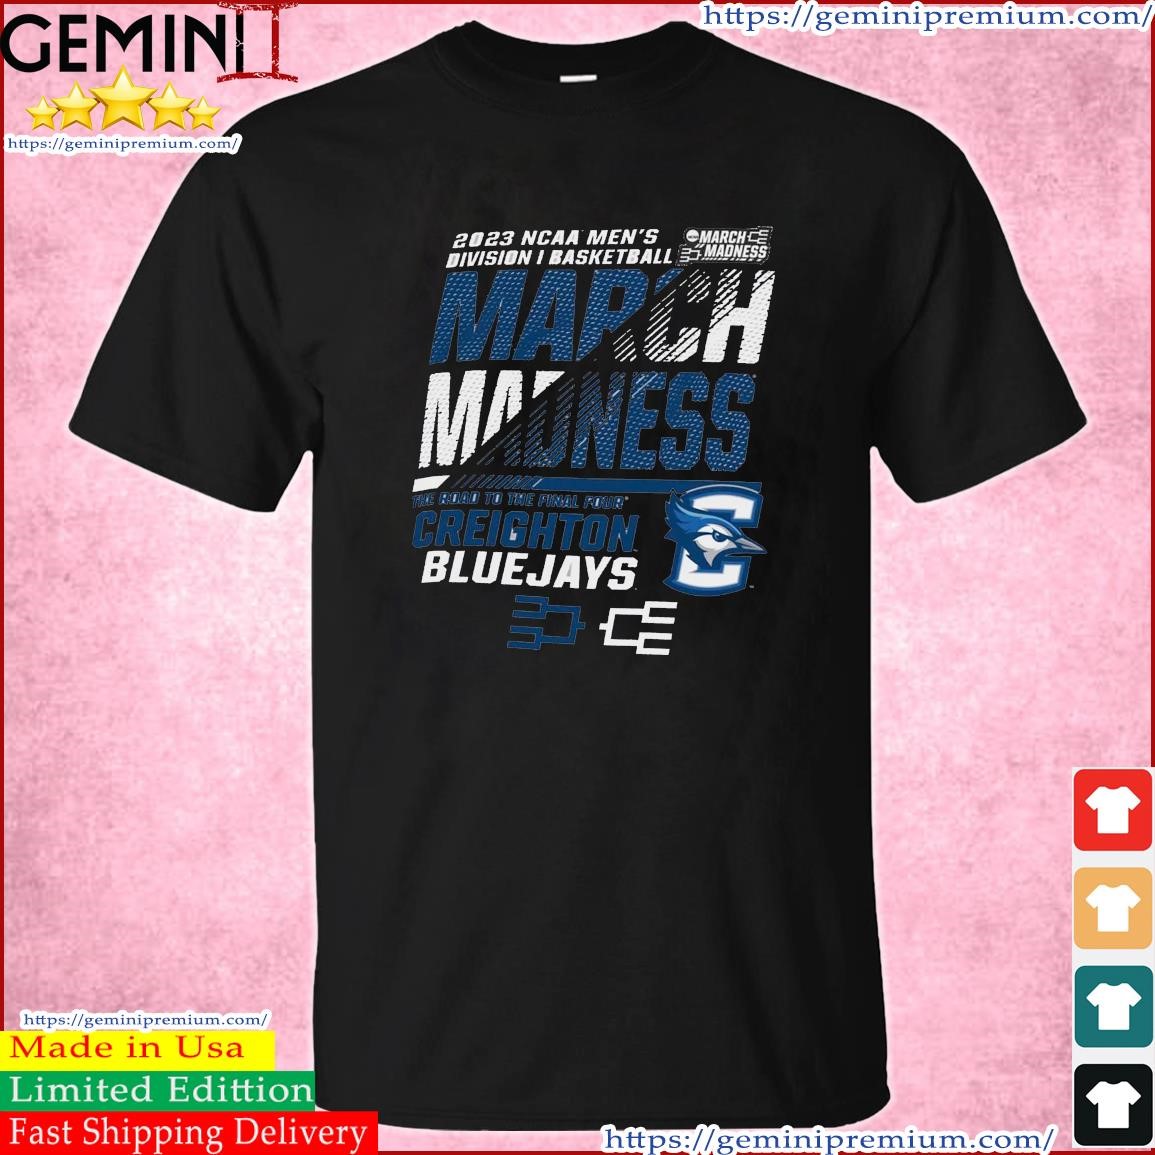 Creighton Men's Basketball 2023 NCAA March Madness The Road To Final Four Shirt